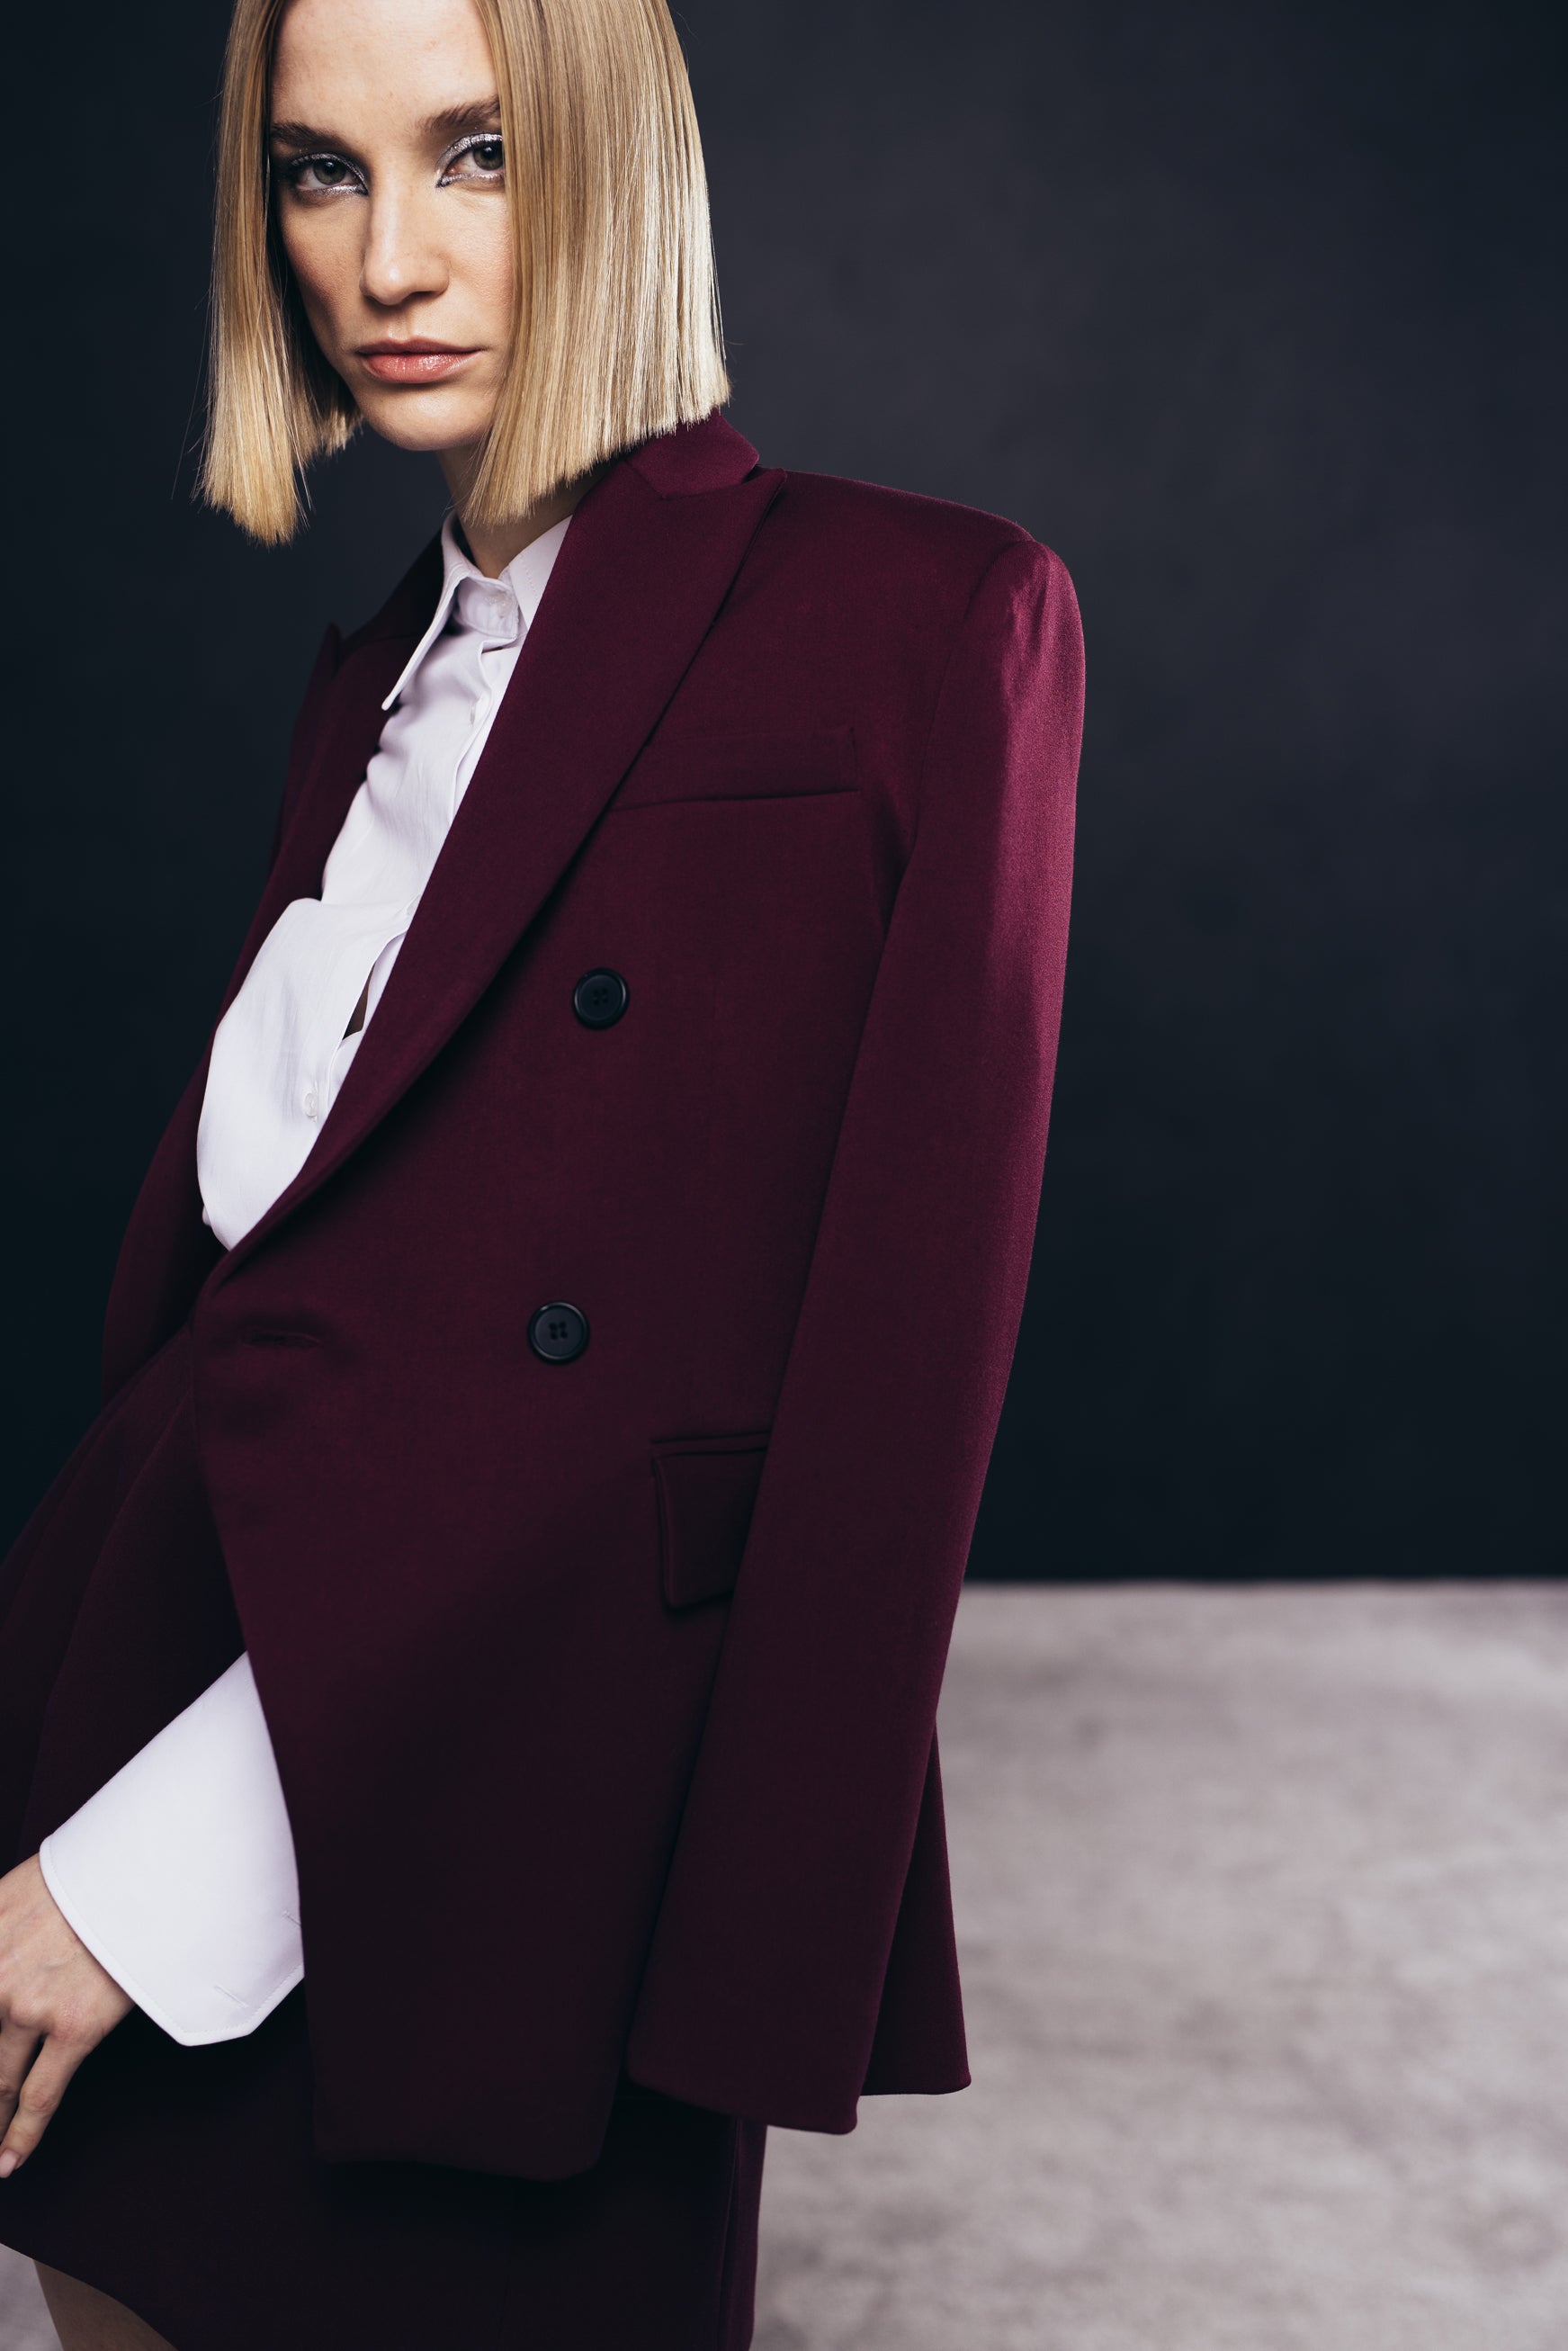 Double-breasted suit blazer in burgundy